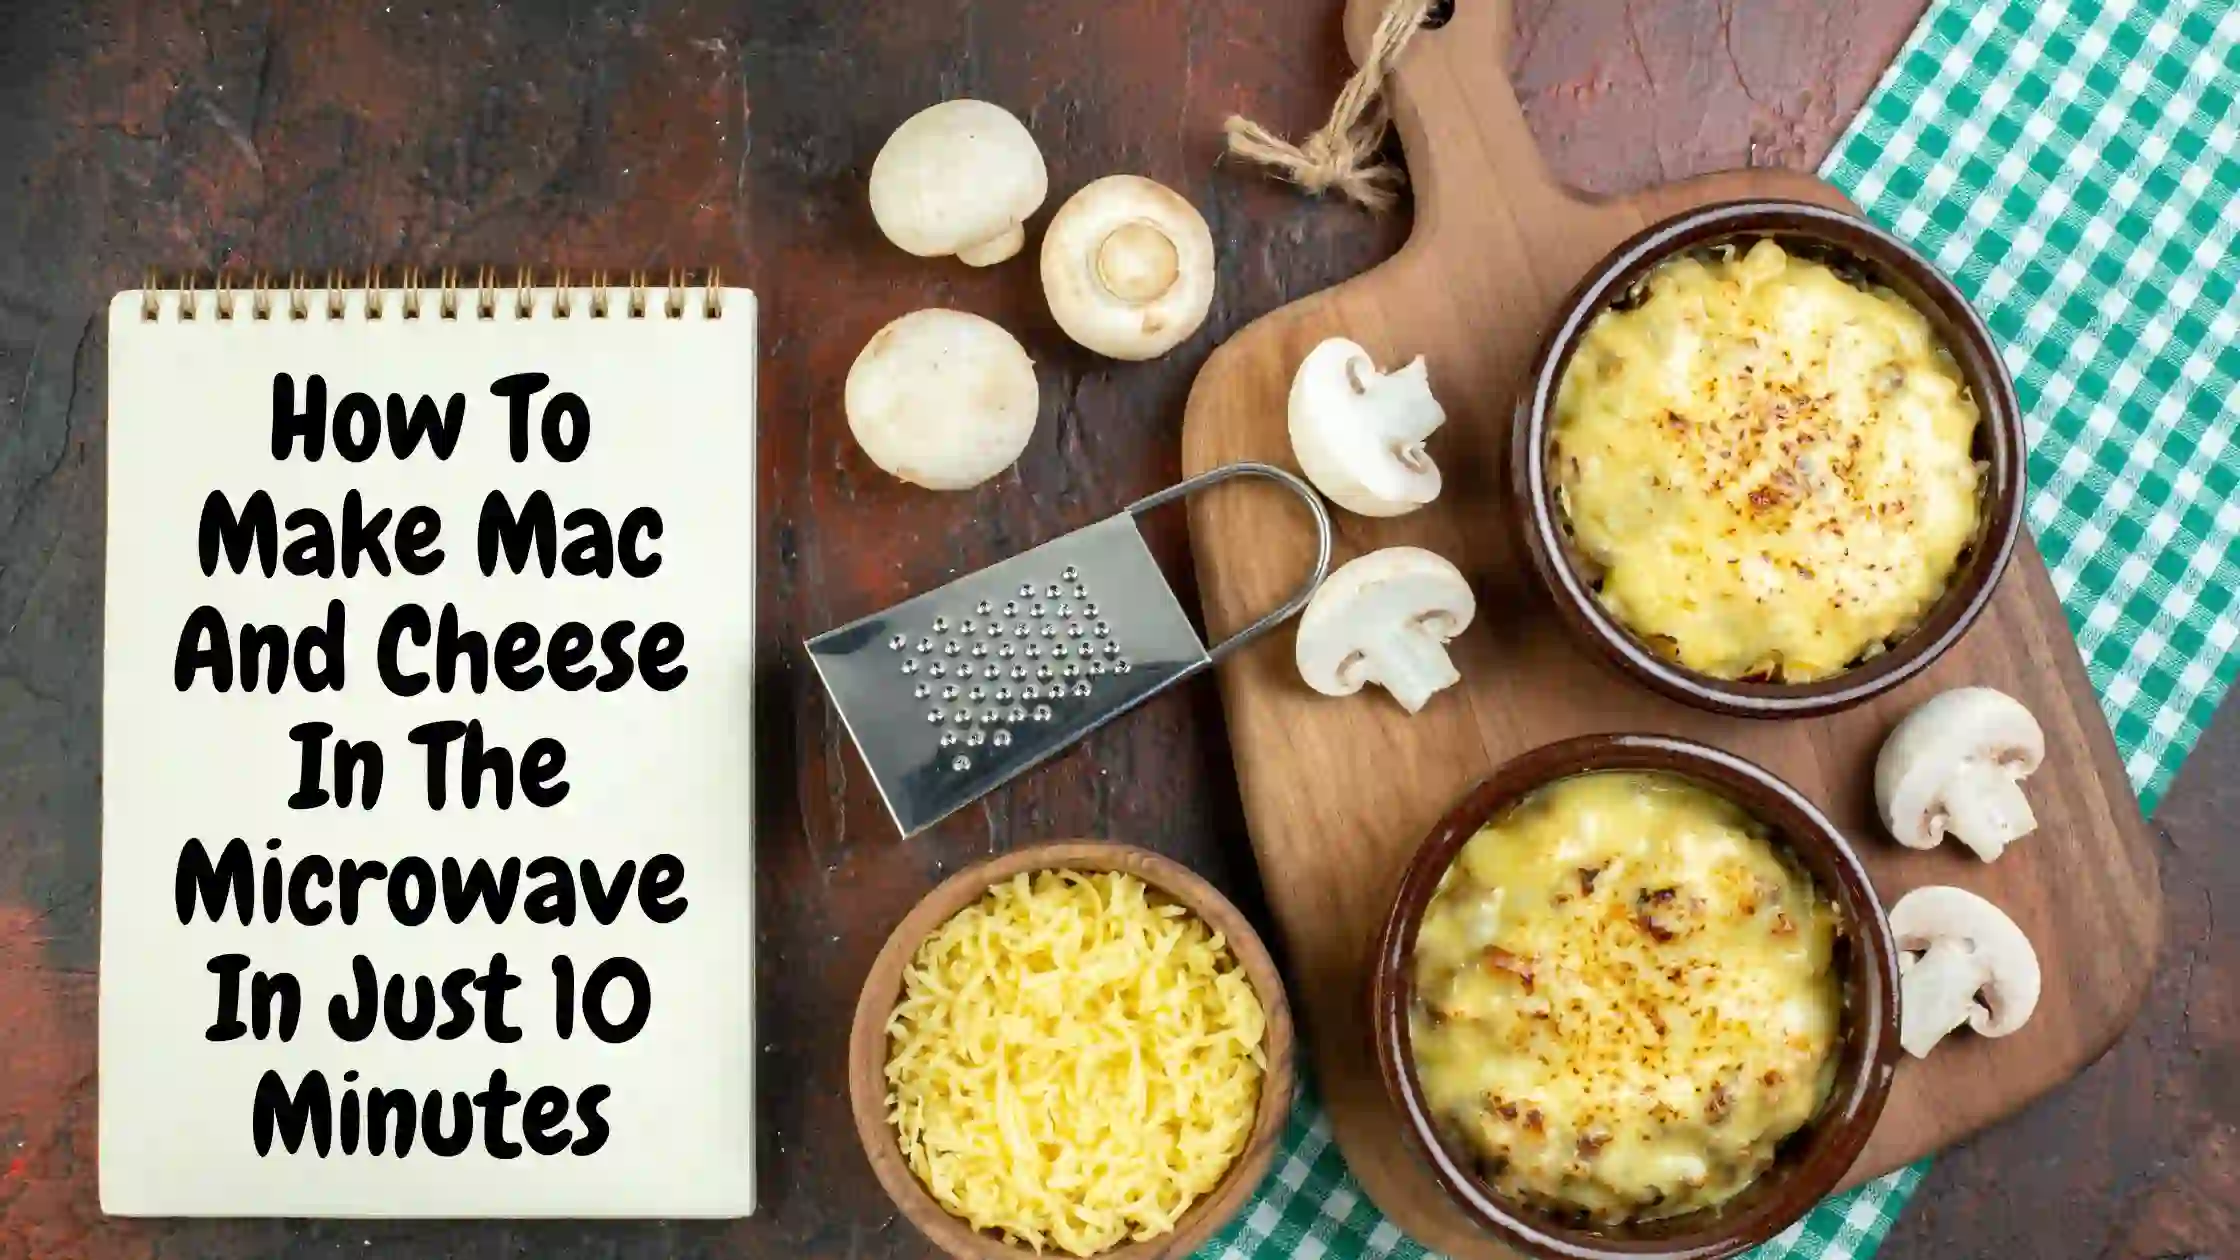 How To Make Mac And Cheese In The Microwave In Just 10 Minutes